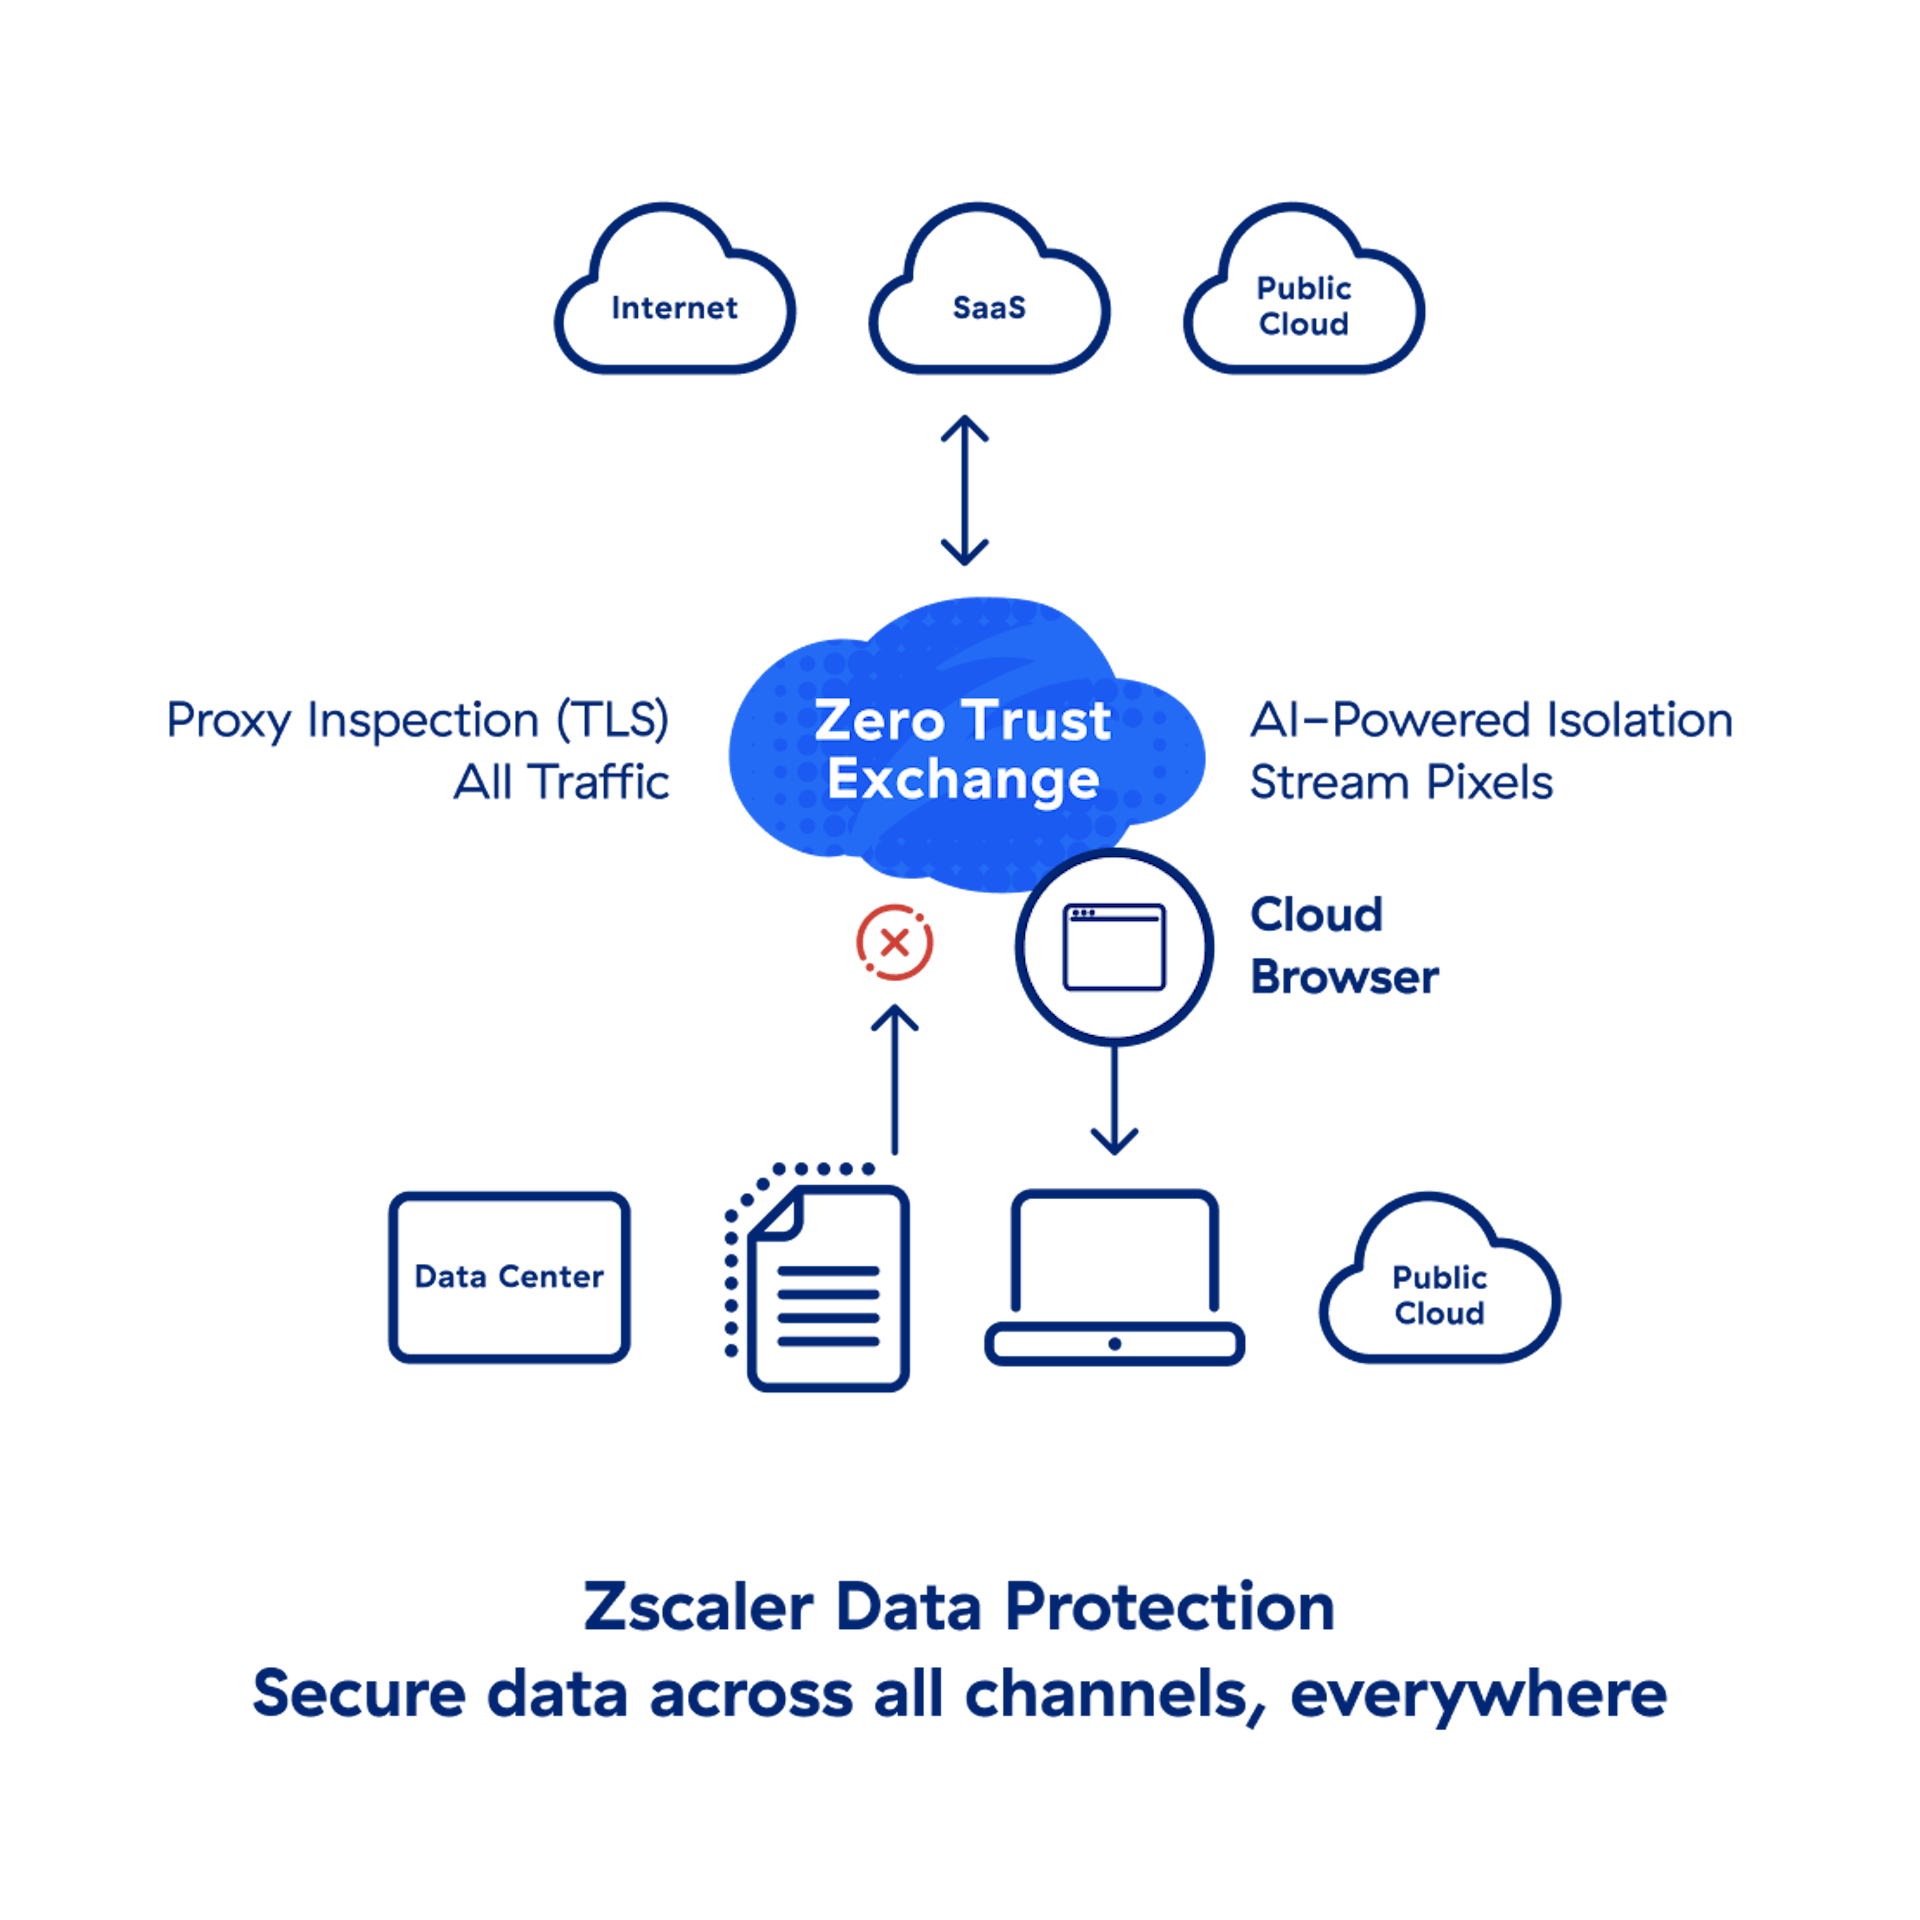 Zscaler Data Protectionの図